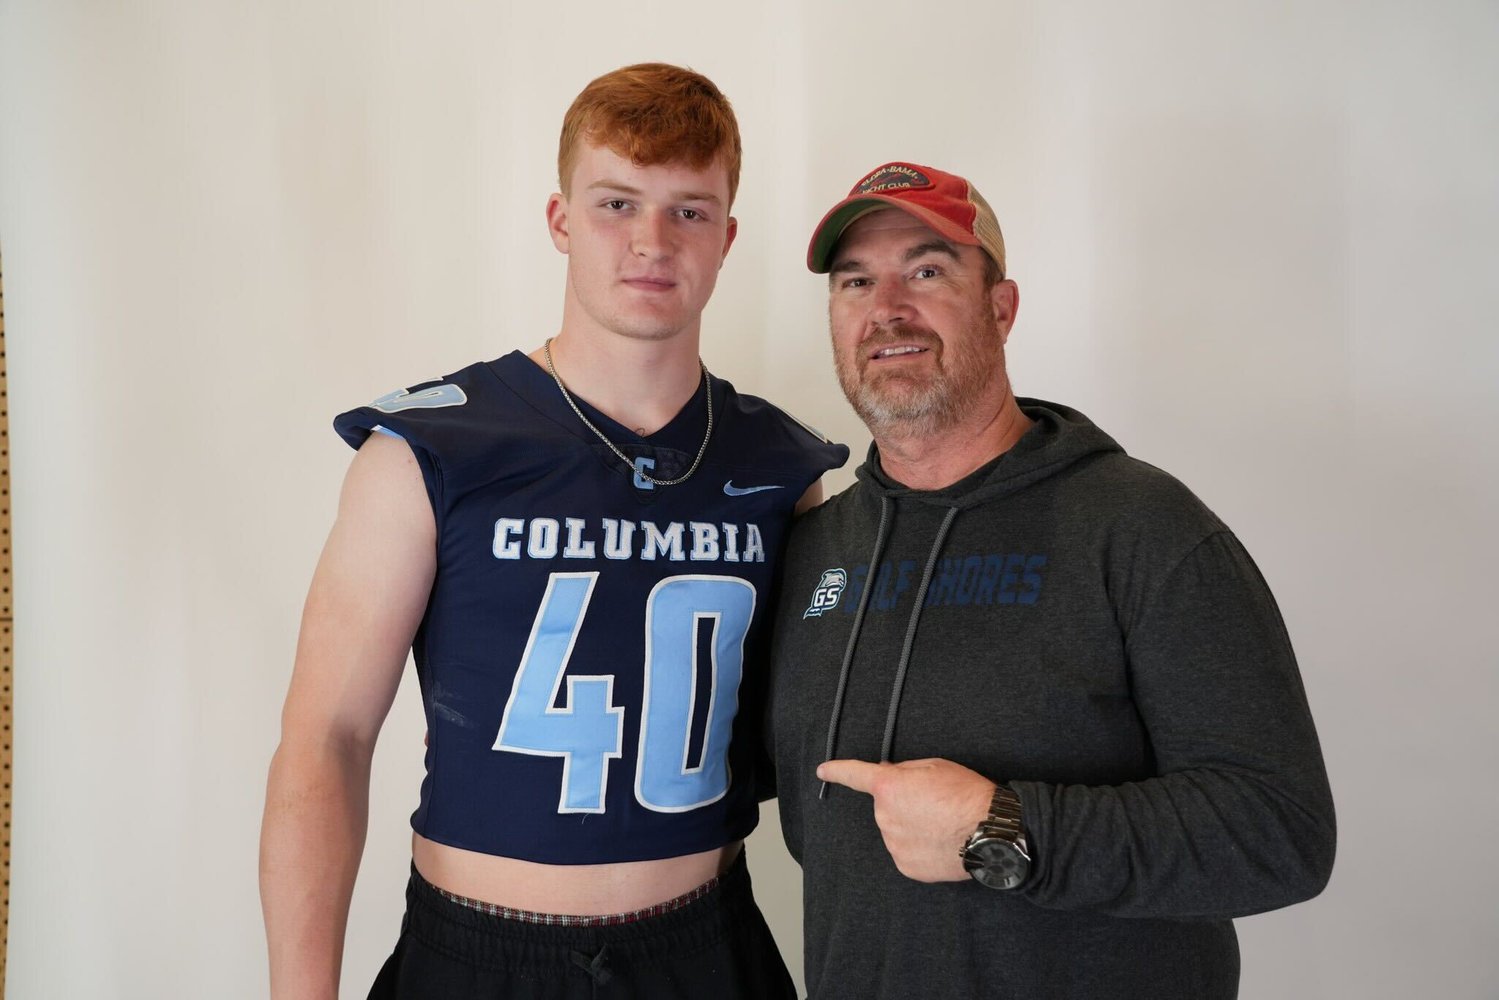 Gulf Shores defensive end Otto Brewer was joined by his father Otto in visiting the Columbia campus Tuesday, March 28. Brewer has made visits to other Ivy League schools including Dartmouth and Penn.